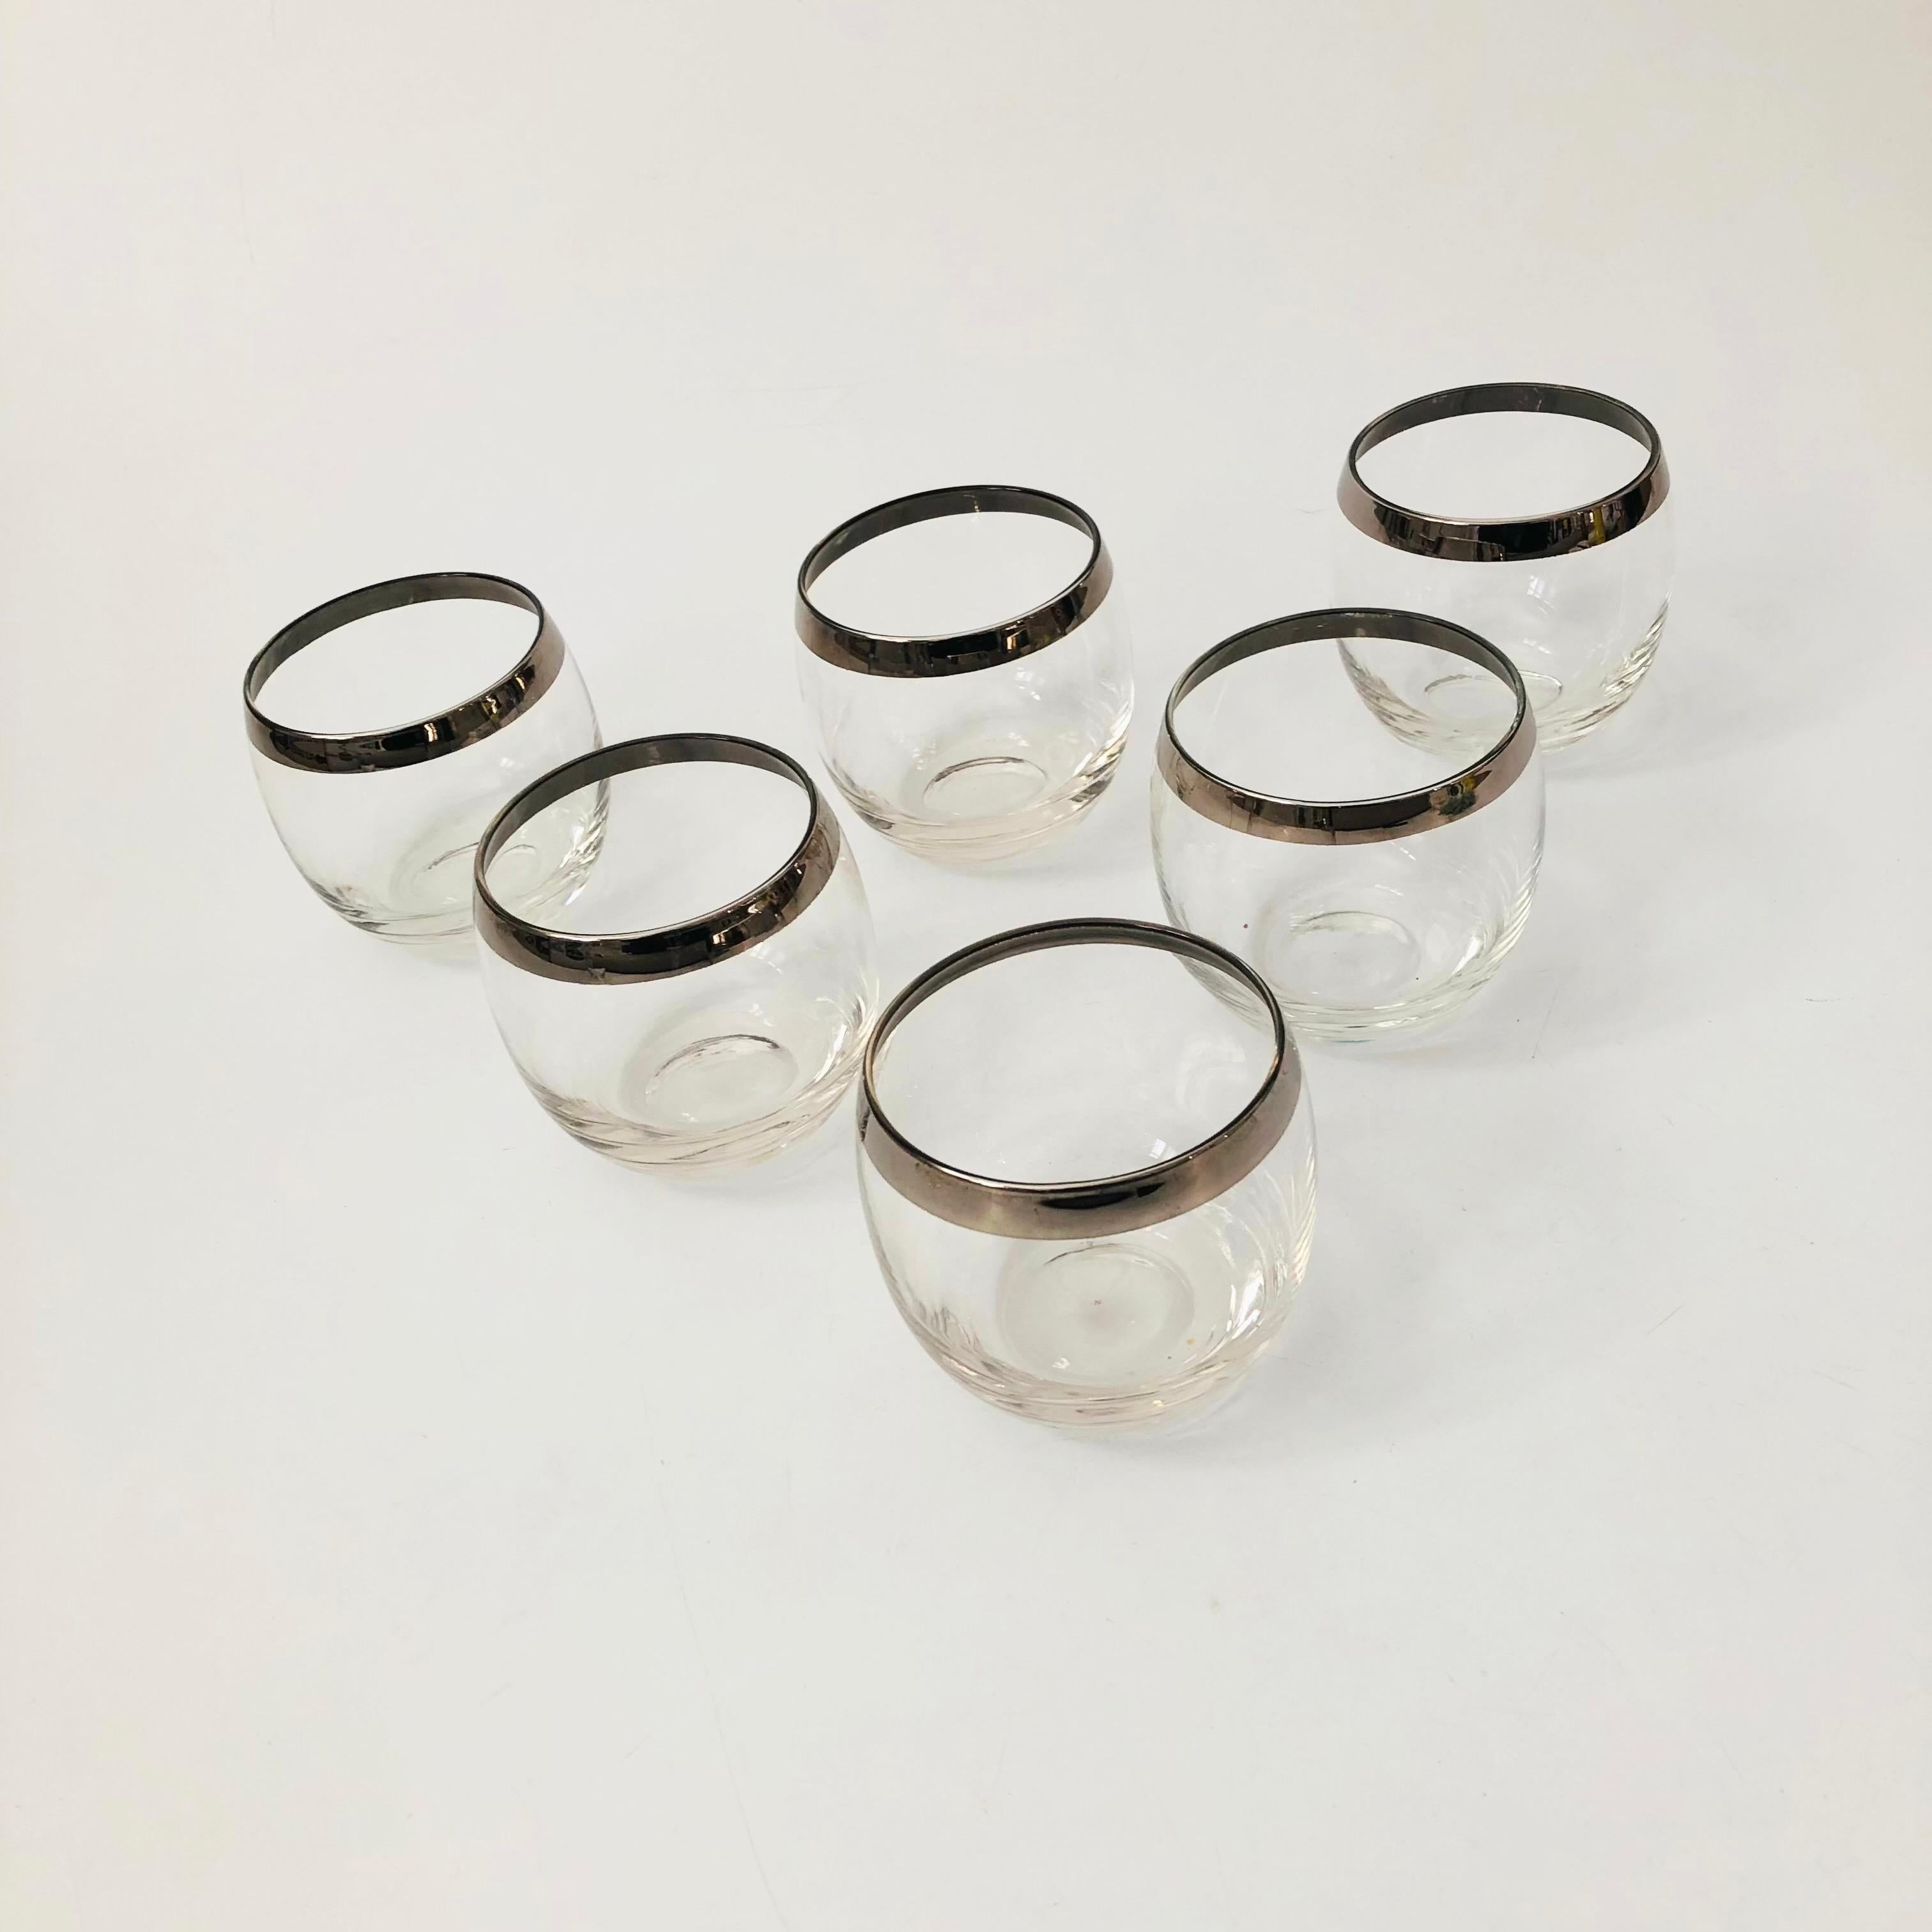 A beautiful set of 6  mid century roly poly cocktail glasses. Each glass decorated with metallic silver rims  in the Dorothy Thorpe style. Perfect for using for cocktails.

